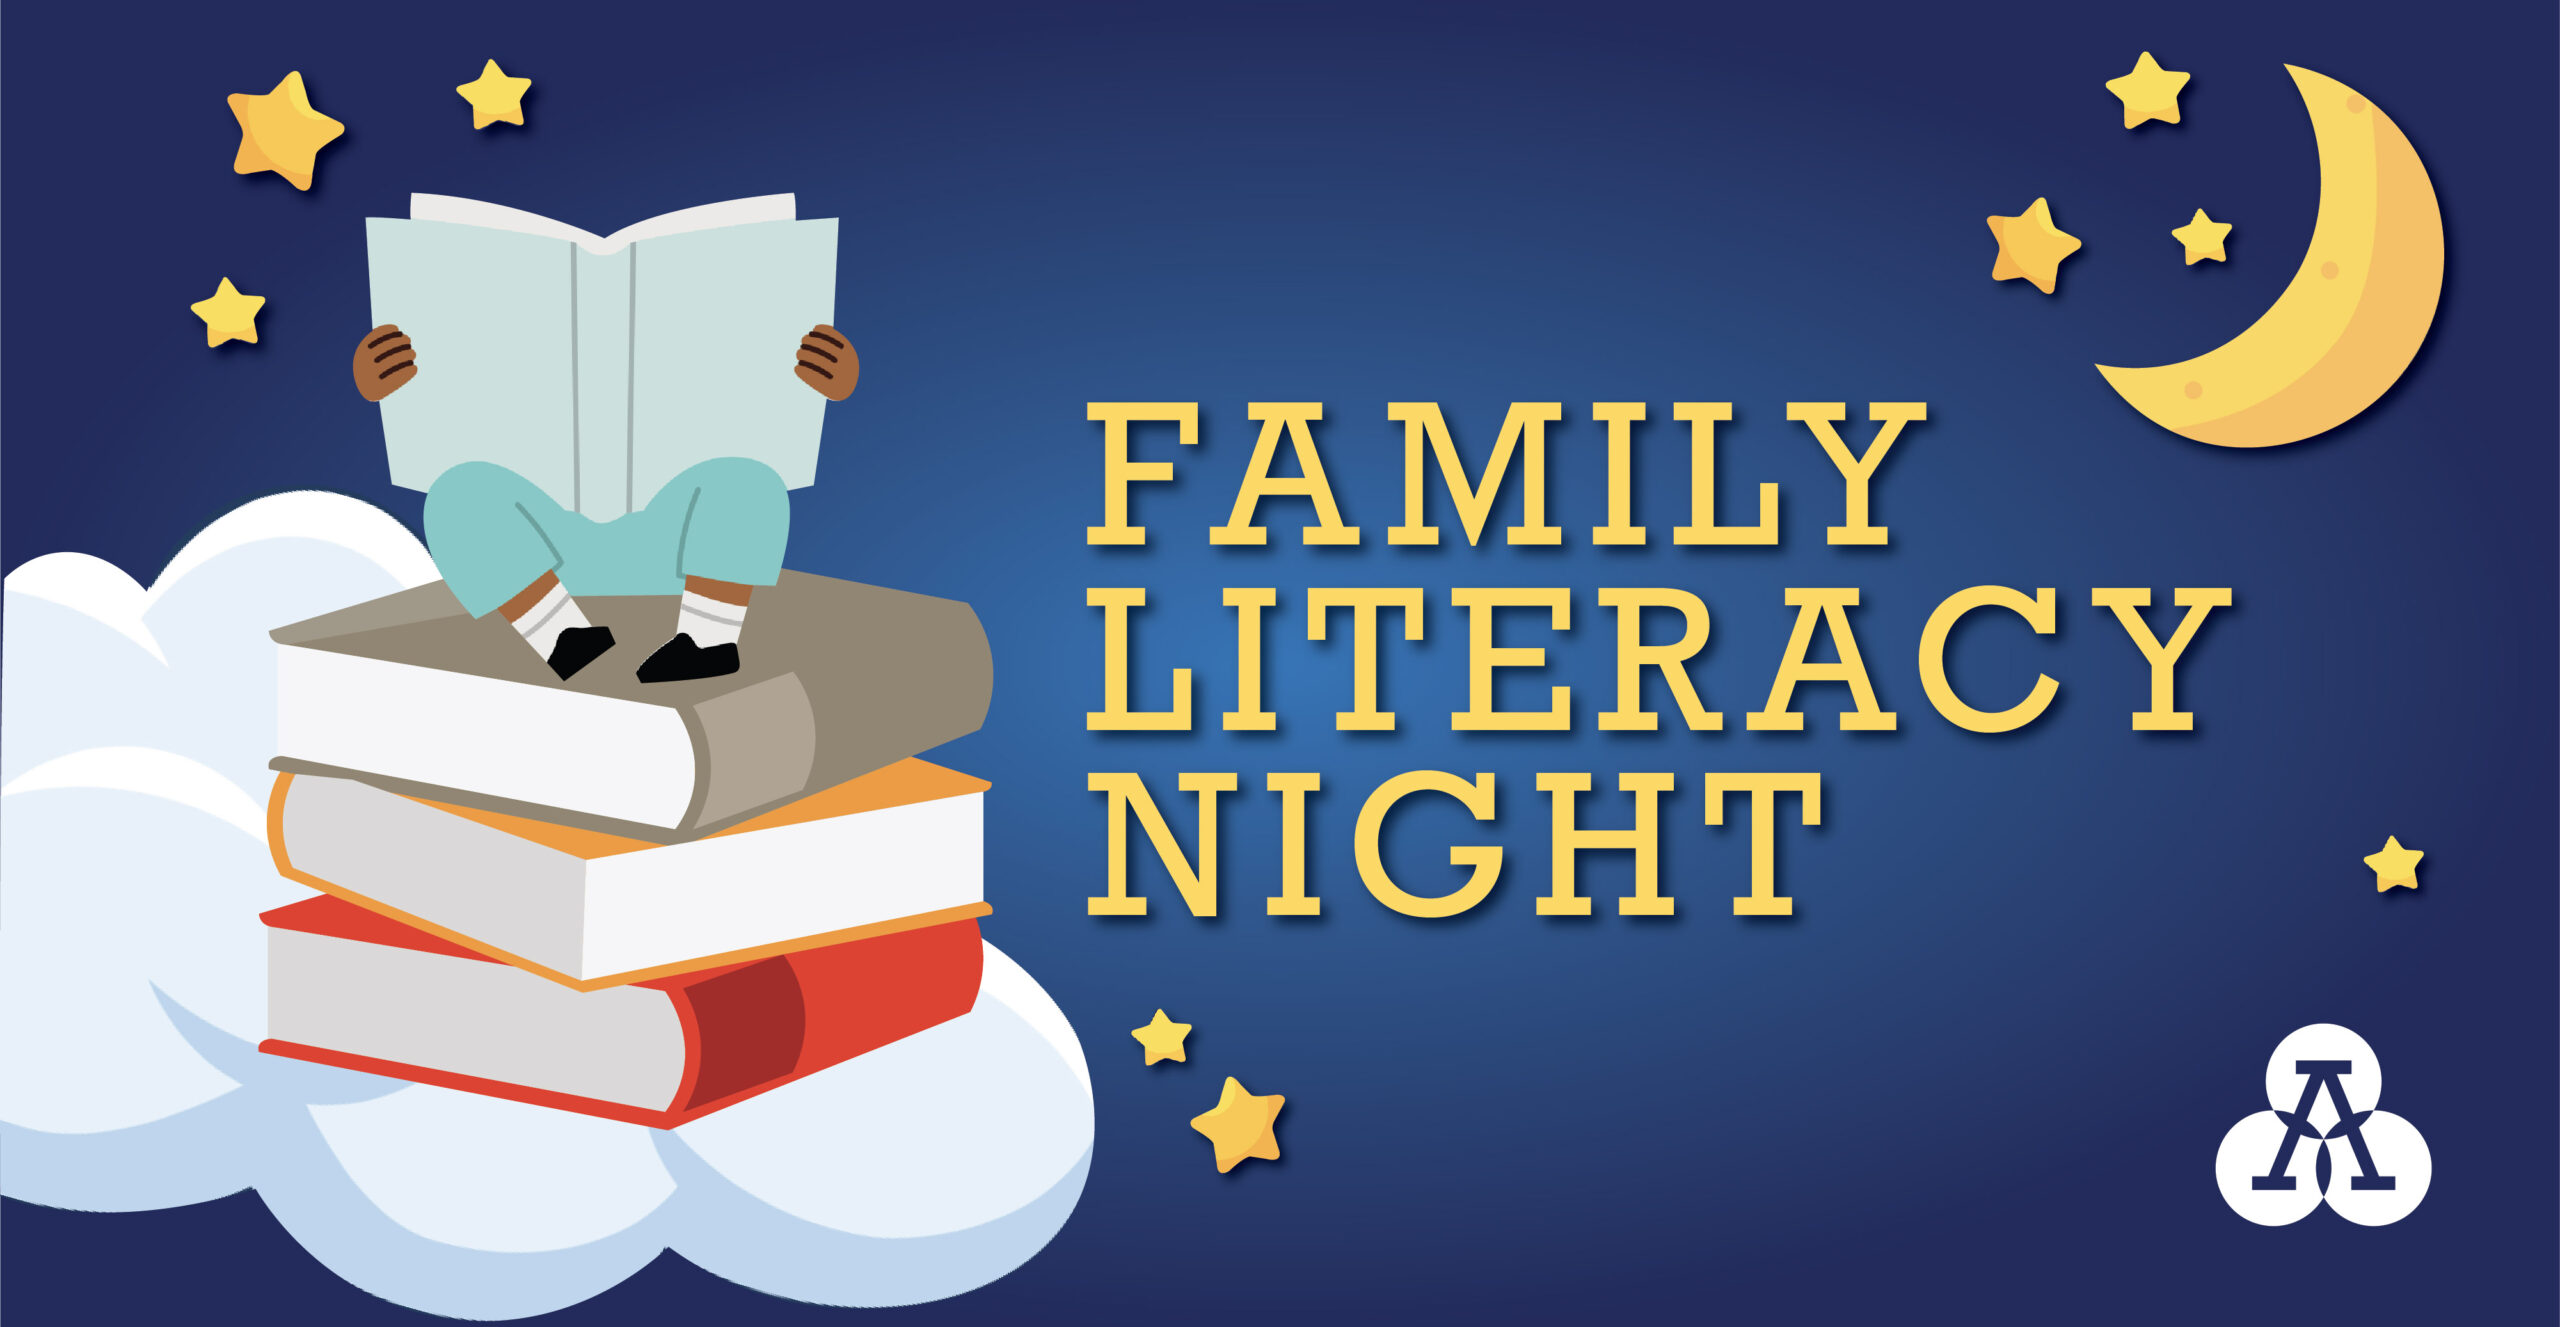 image of child reading books that says family literacy night